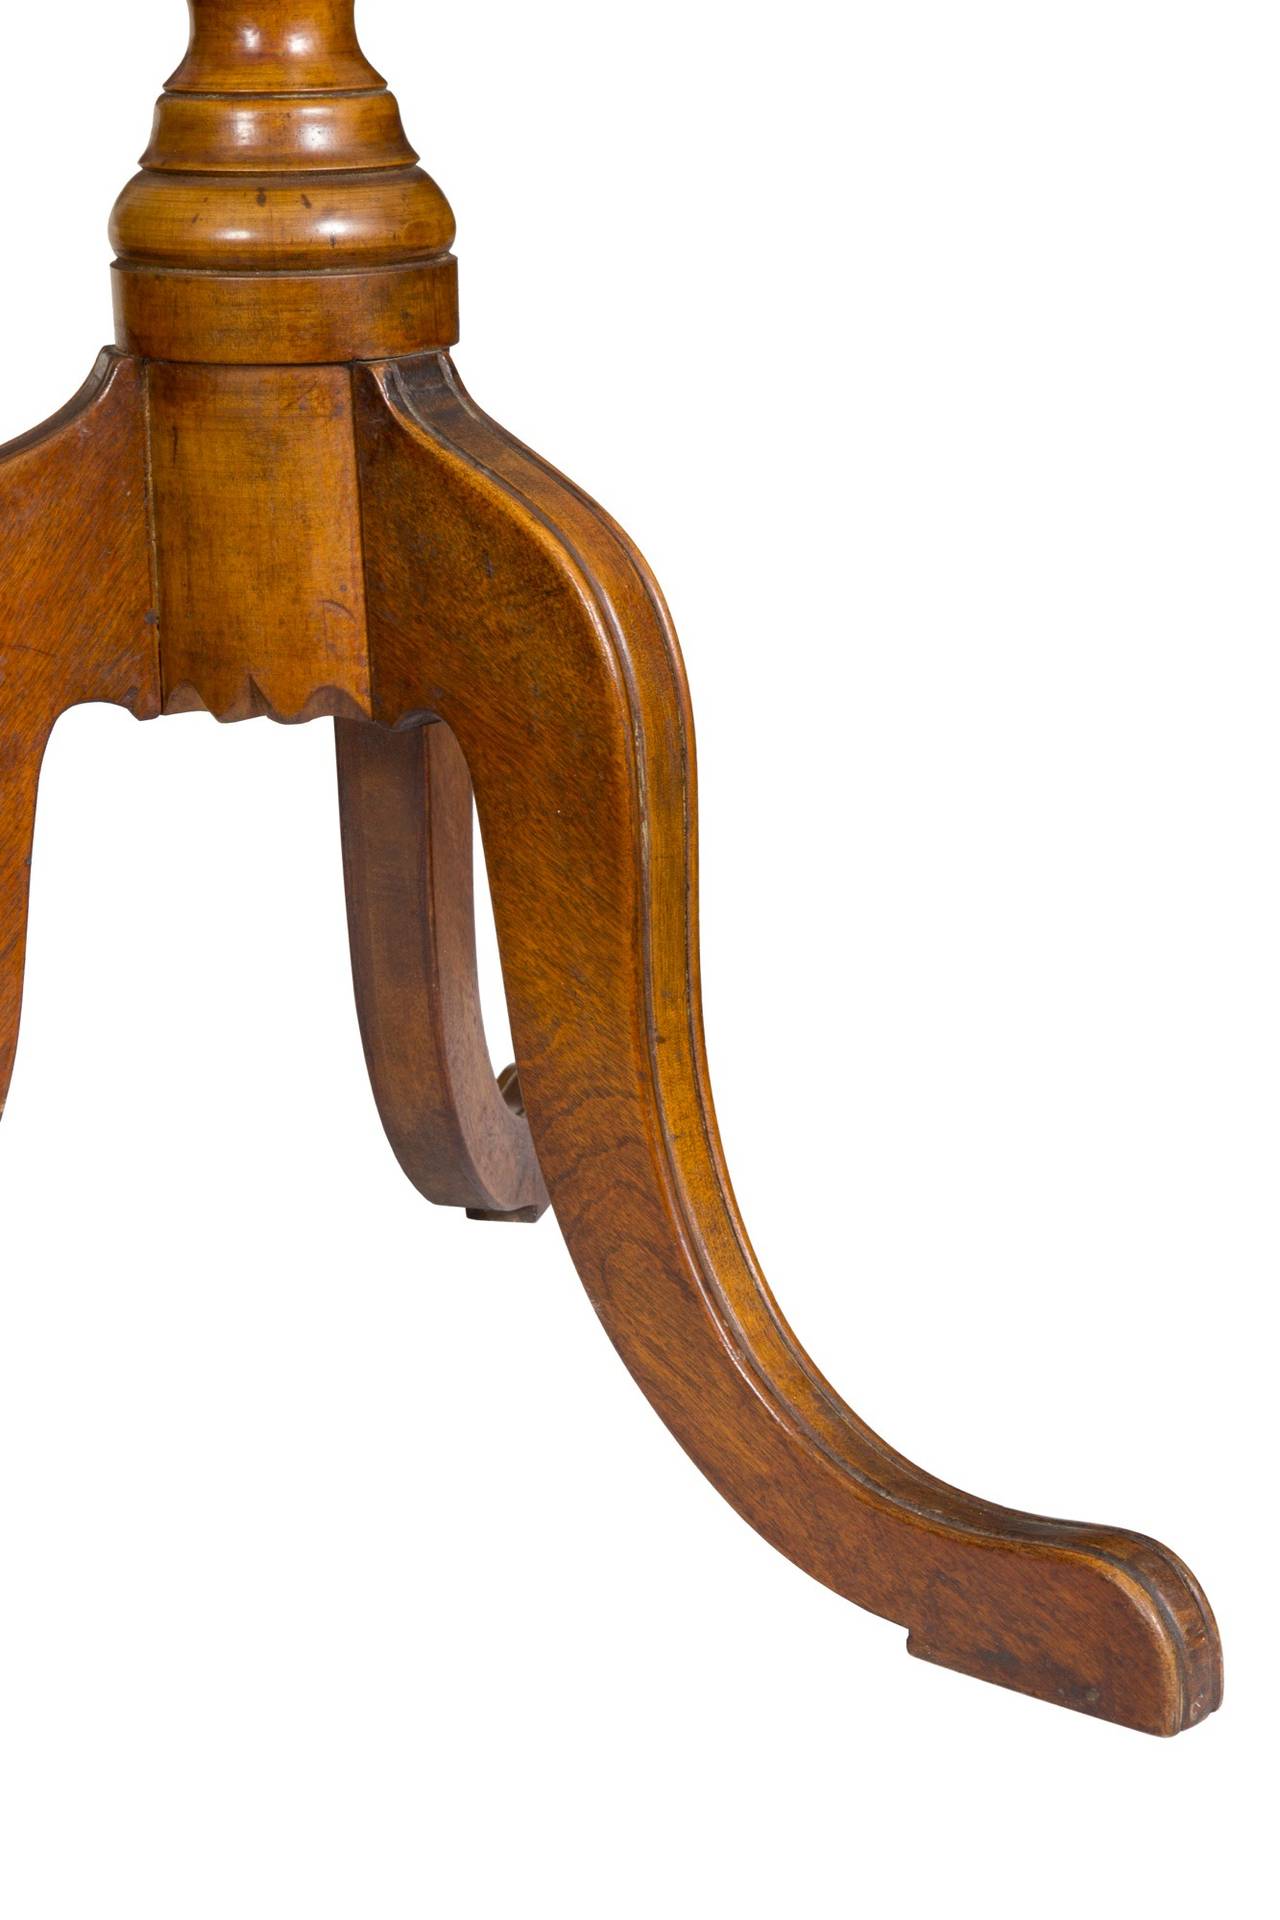 Birch Federal Candle Stand with Notched Corners, circa 1820 In Excellent Condition For Sale In Providence, RI